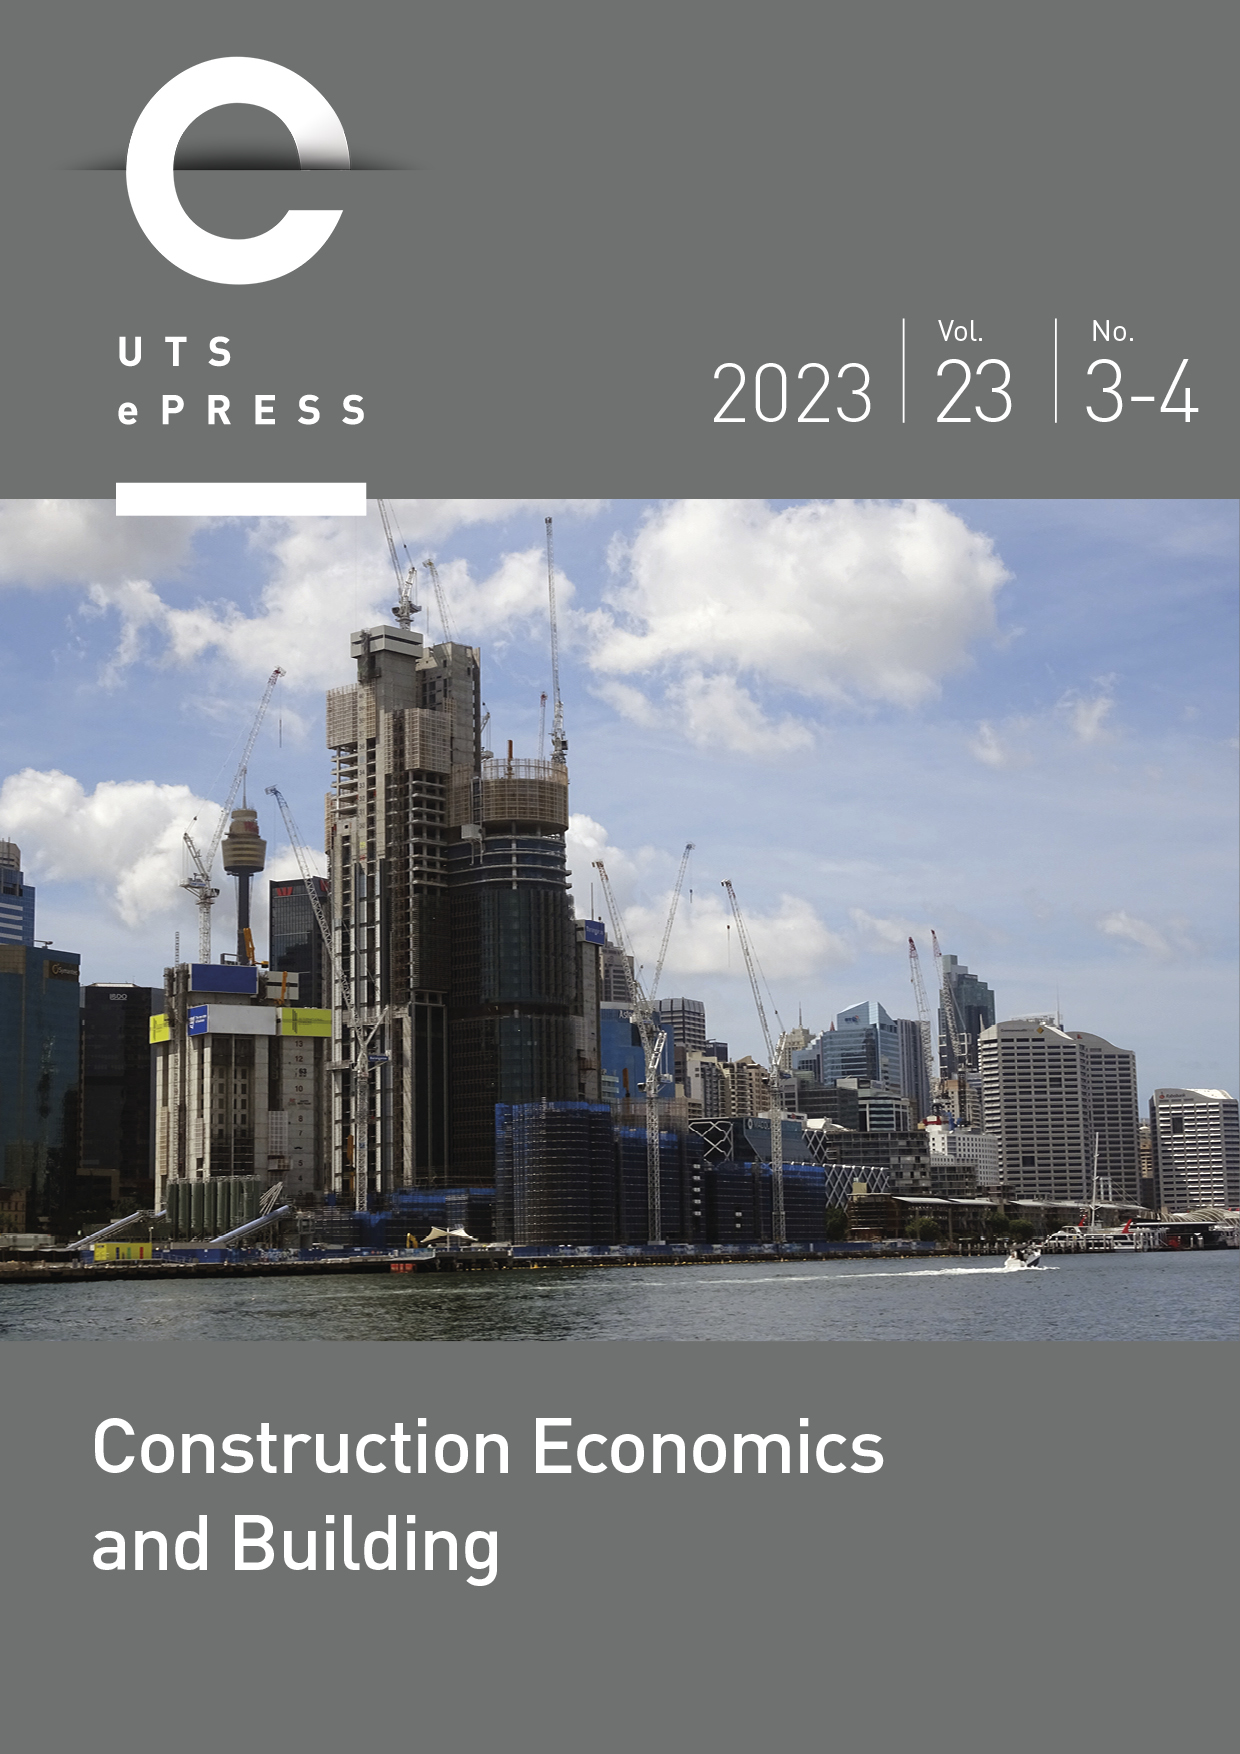 "Construction Economics and Building" 2021 Volume 21 Number 3 cover